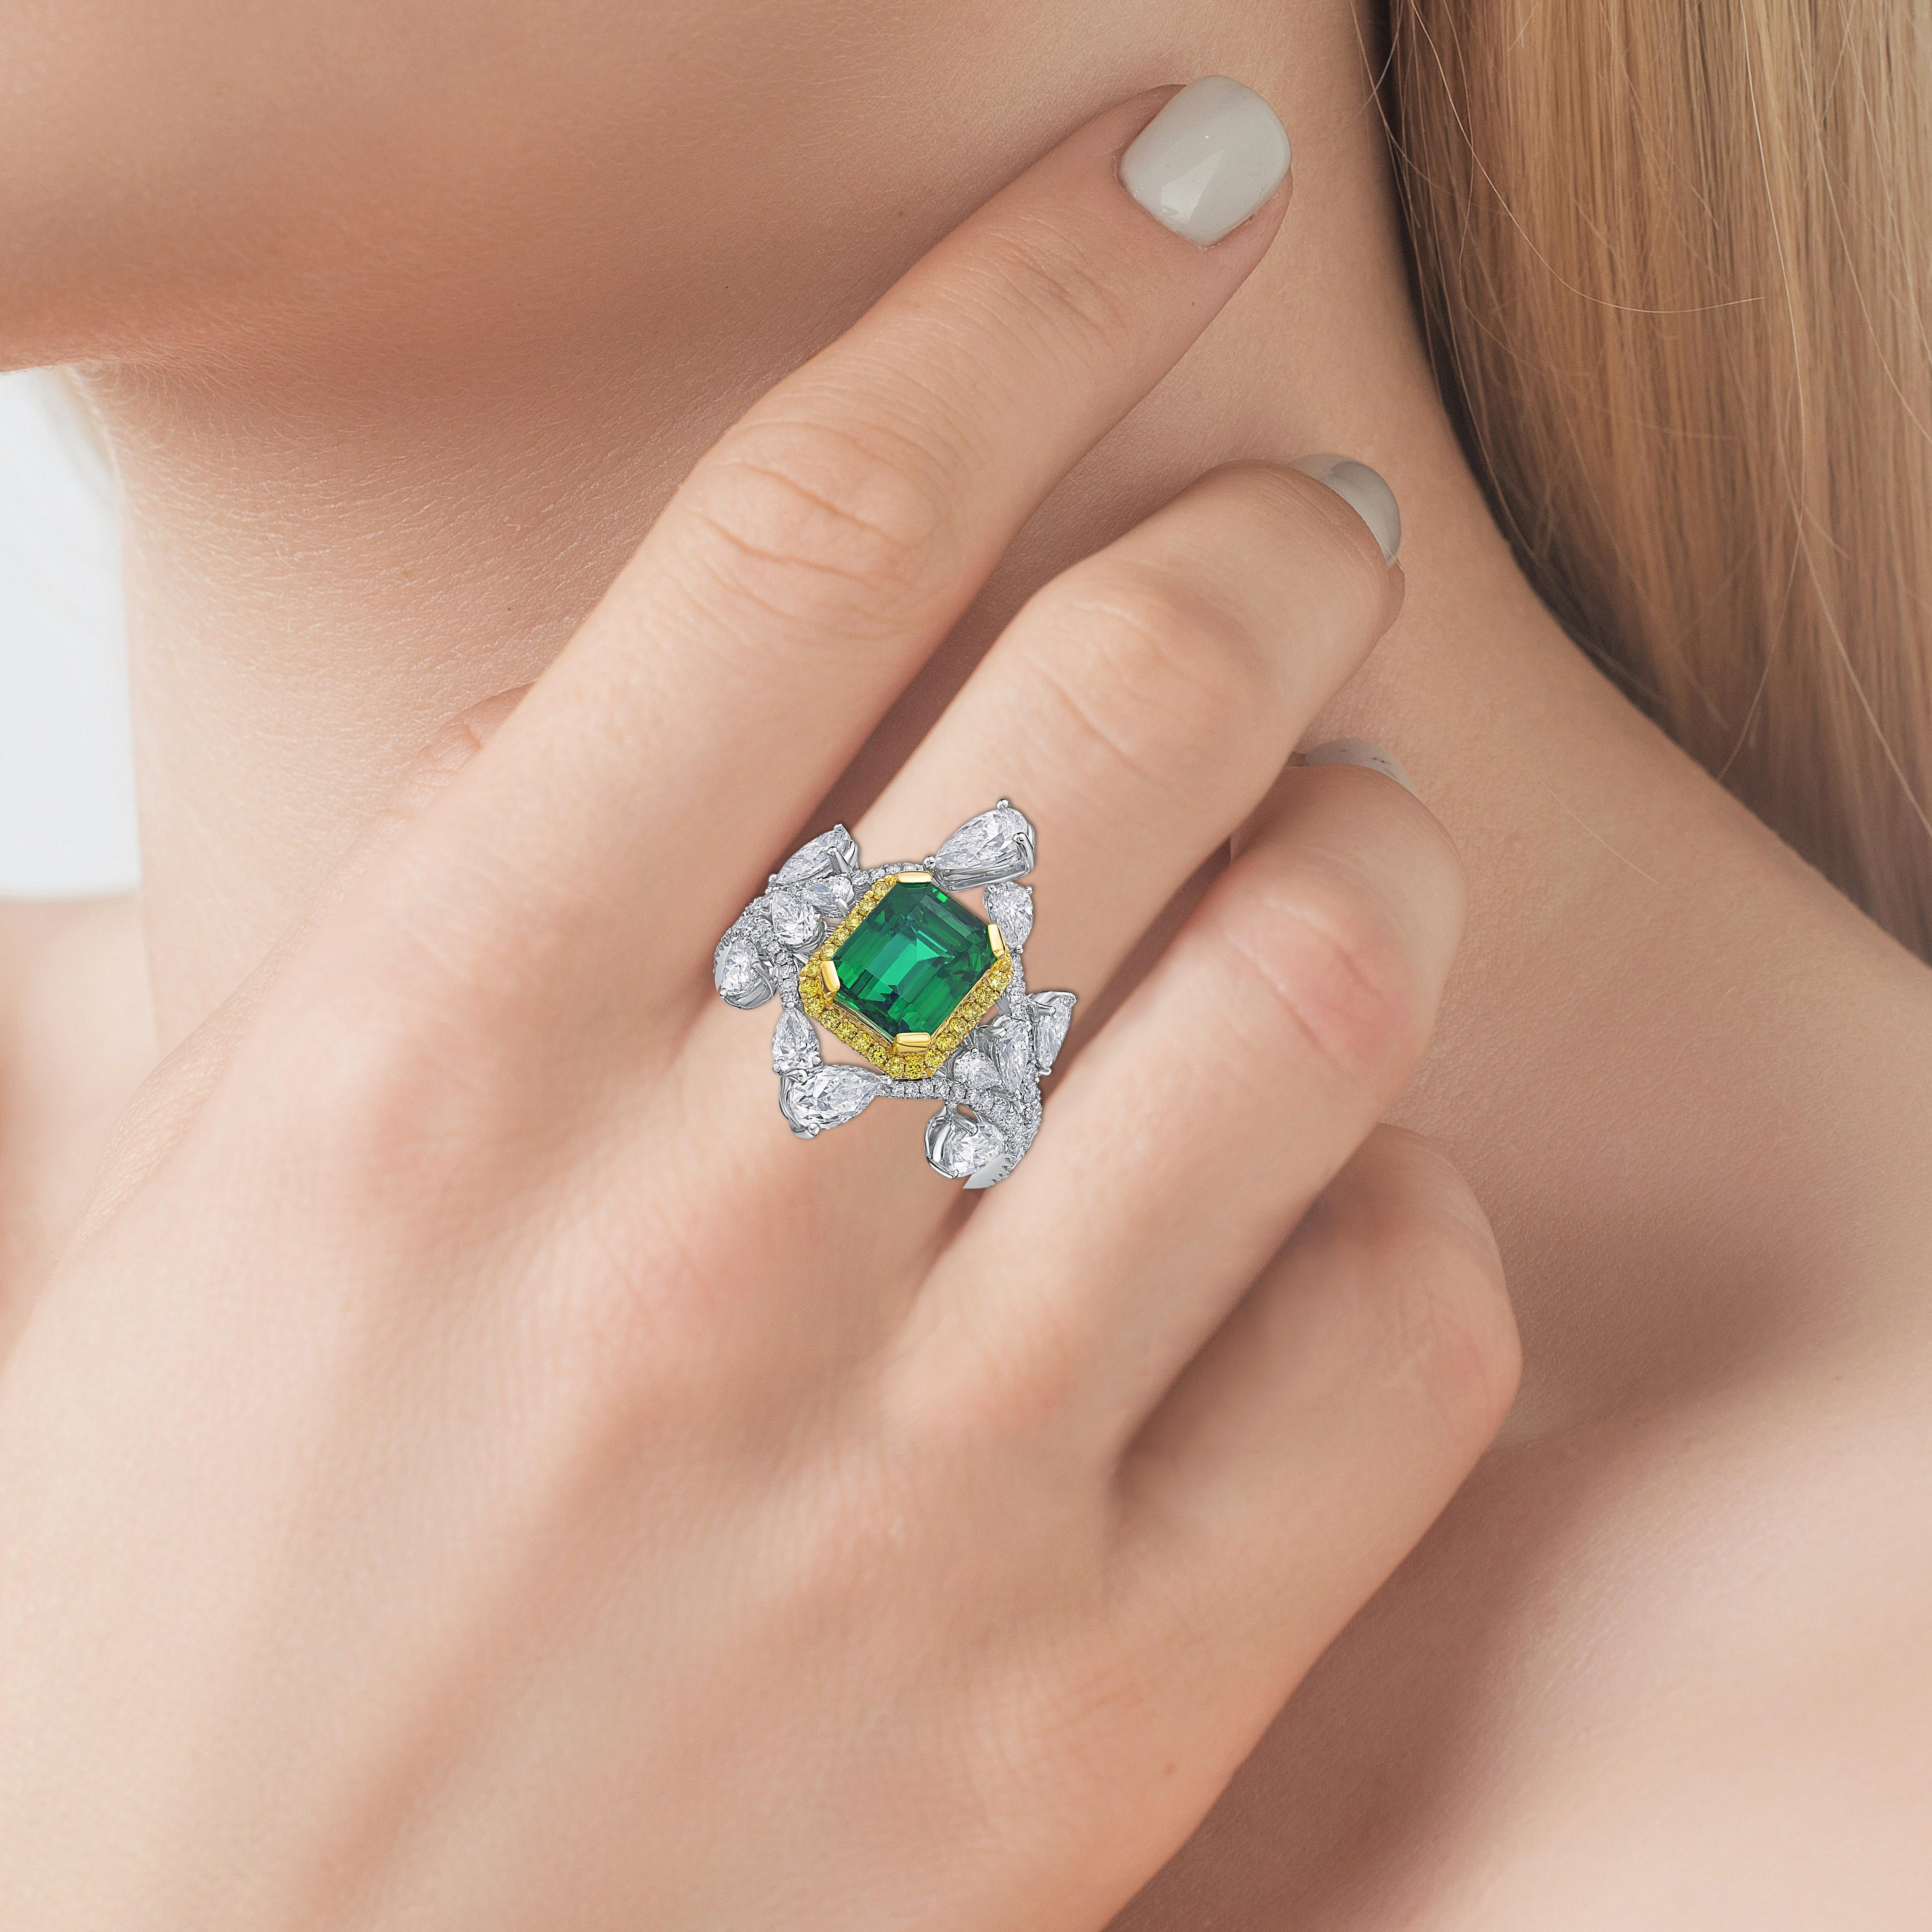 This ring present a 2.79 carat emerald shape emerald from Zambia with a halo of yellow diamond, and white diamond, finished in white gold. 

Zambian emeralds are rising in popularity in the gemstone world. And they had a desirable vivid green color.